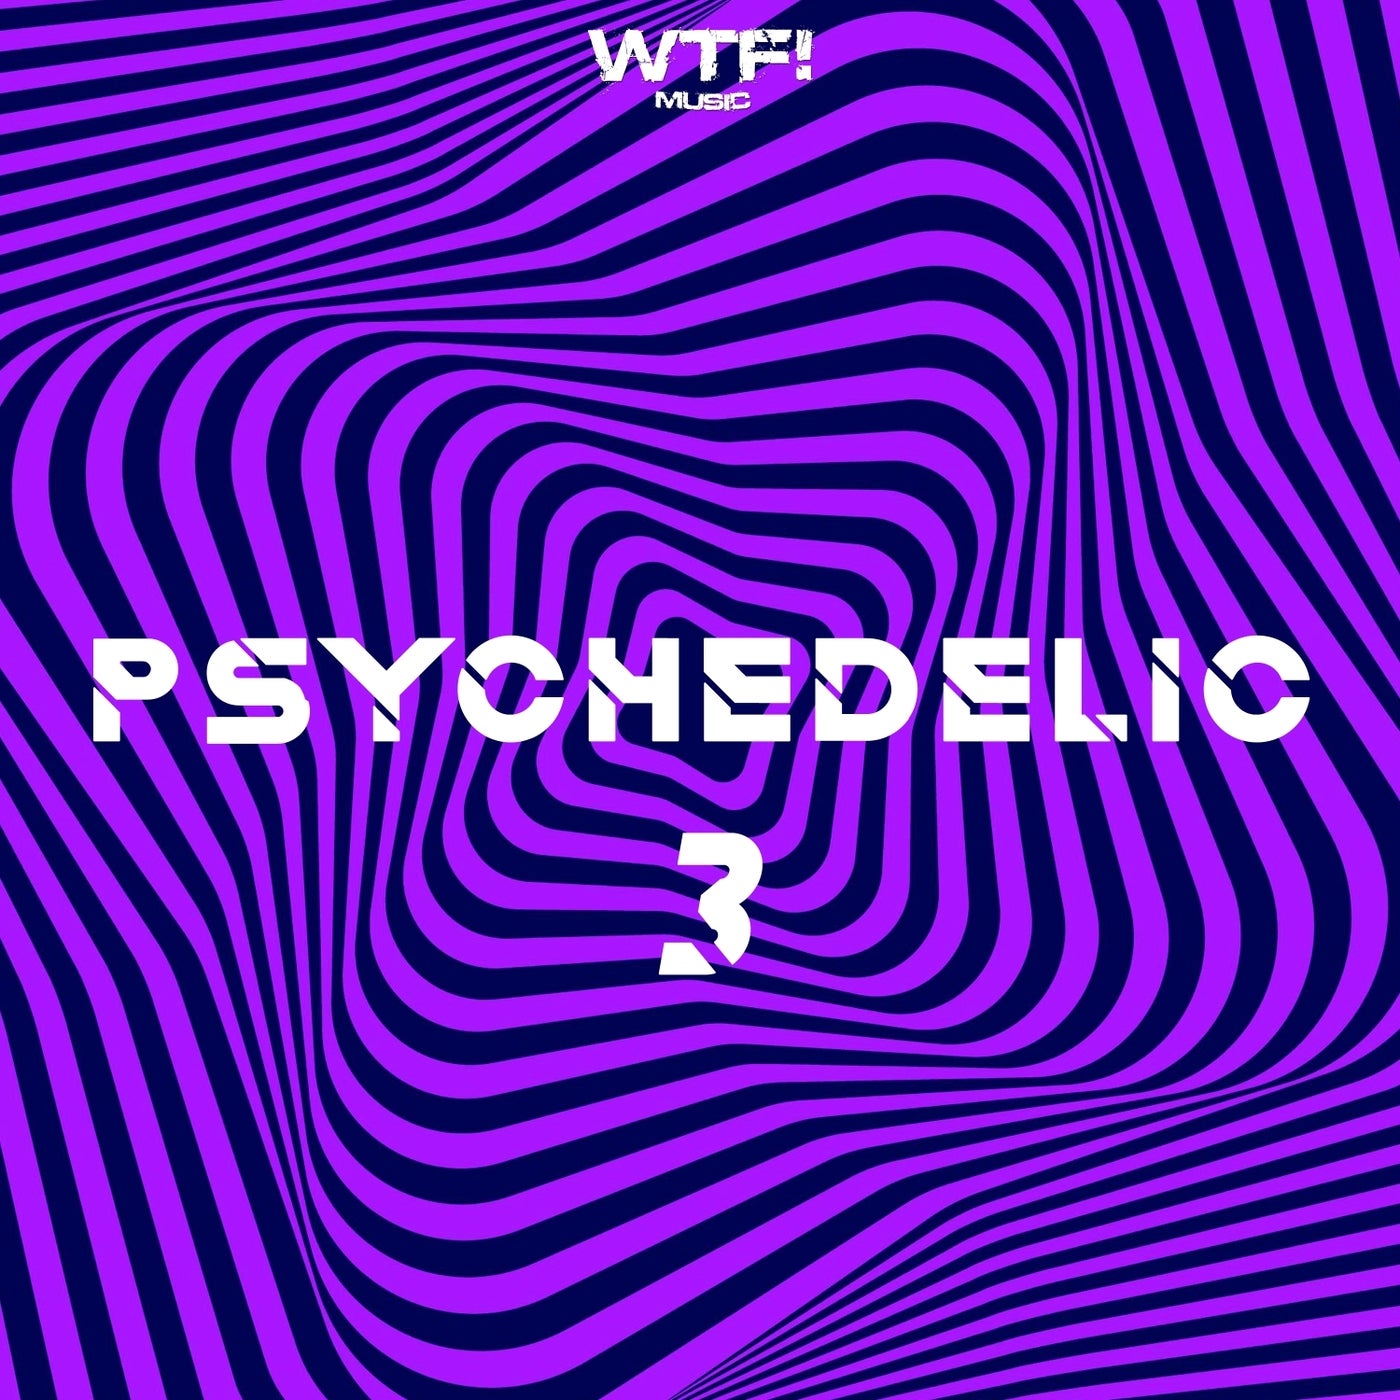 Psychedelic 3